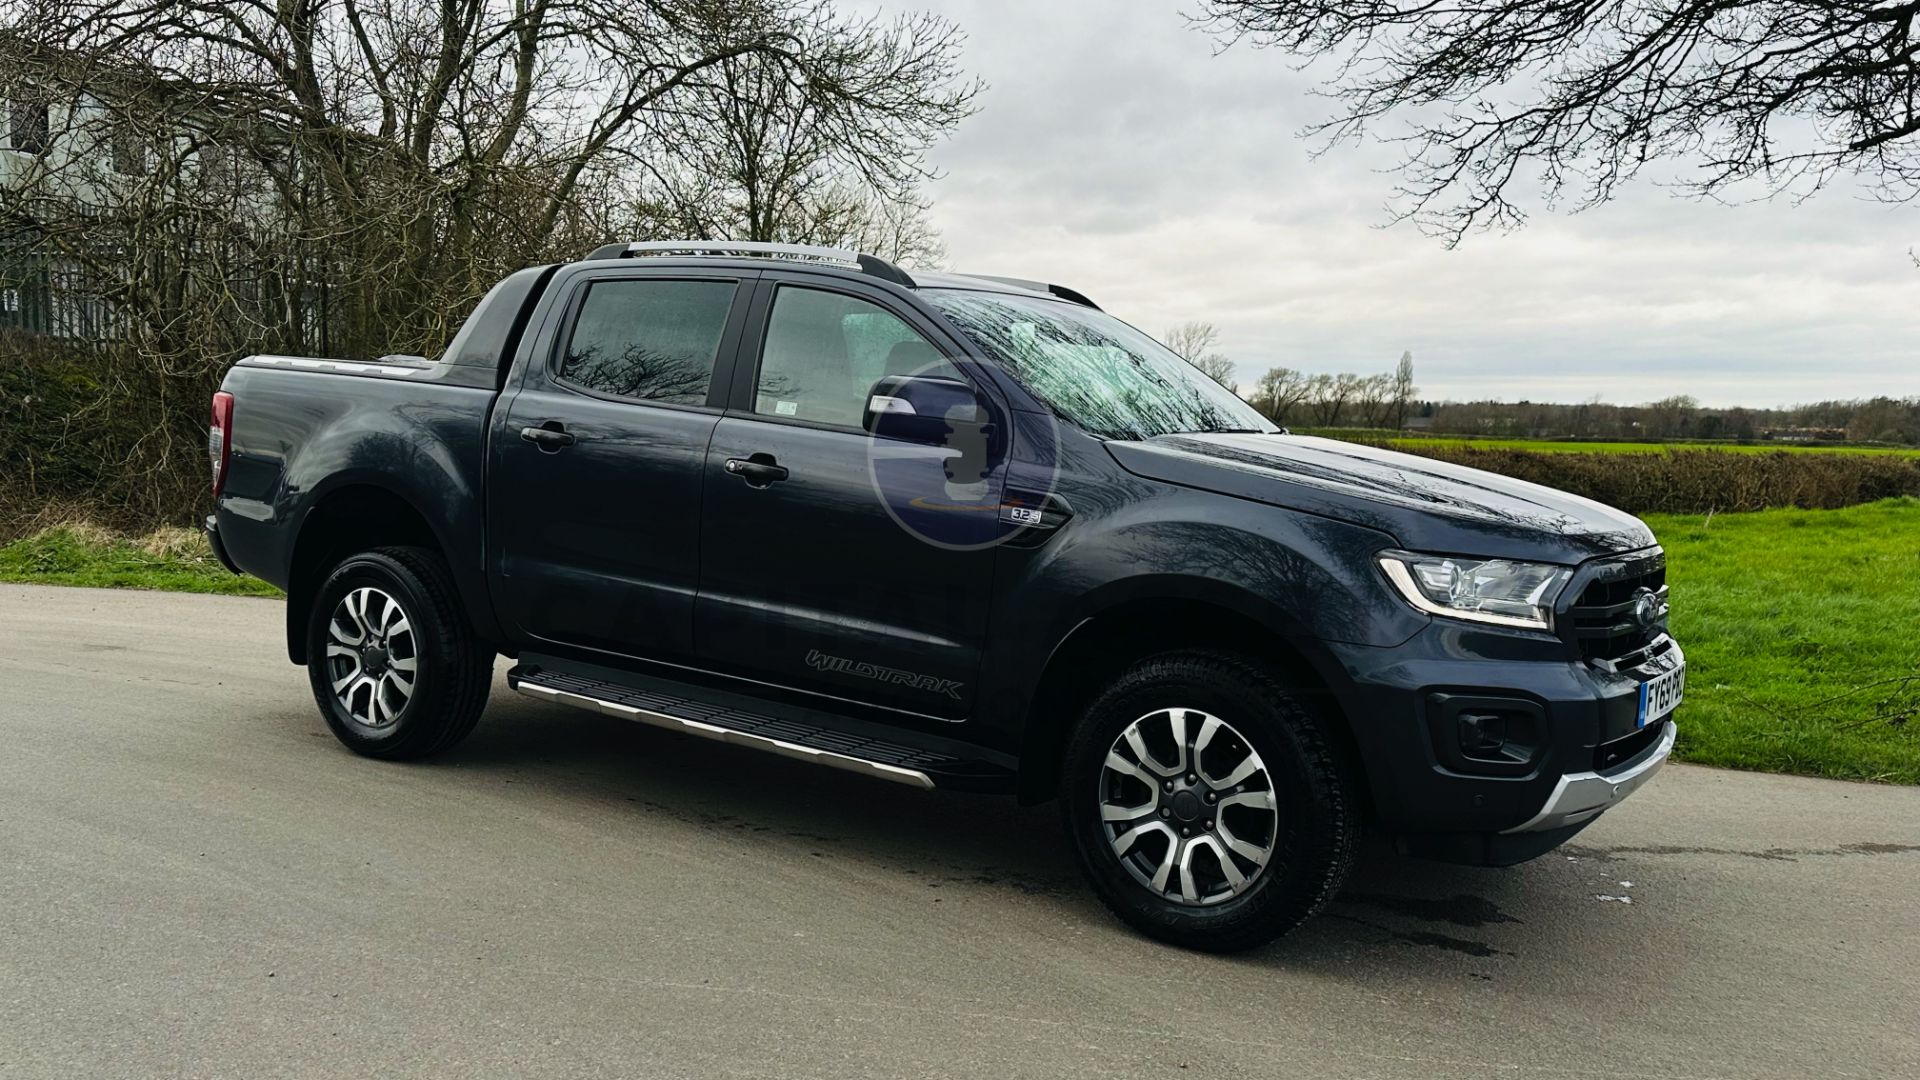 (On Sale) FORD RANGER *WILDTRAK EDITION* DOUBLE CAB PICK-UP (69 REG - EURO 6) 3.2 TDCI - AUTOMATIC - Image 2 of 49